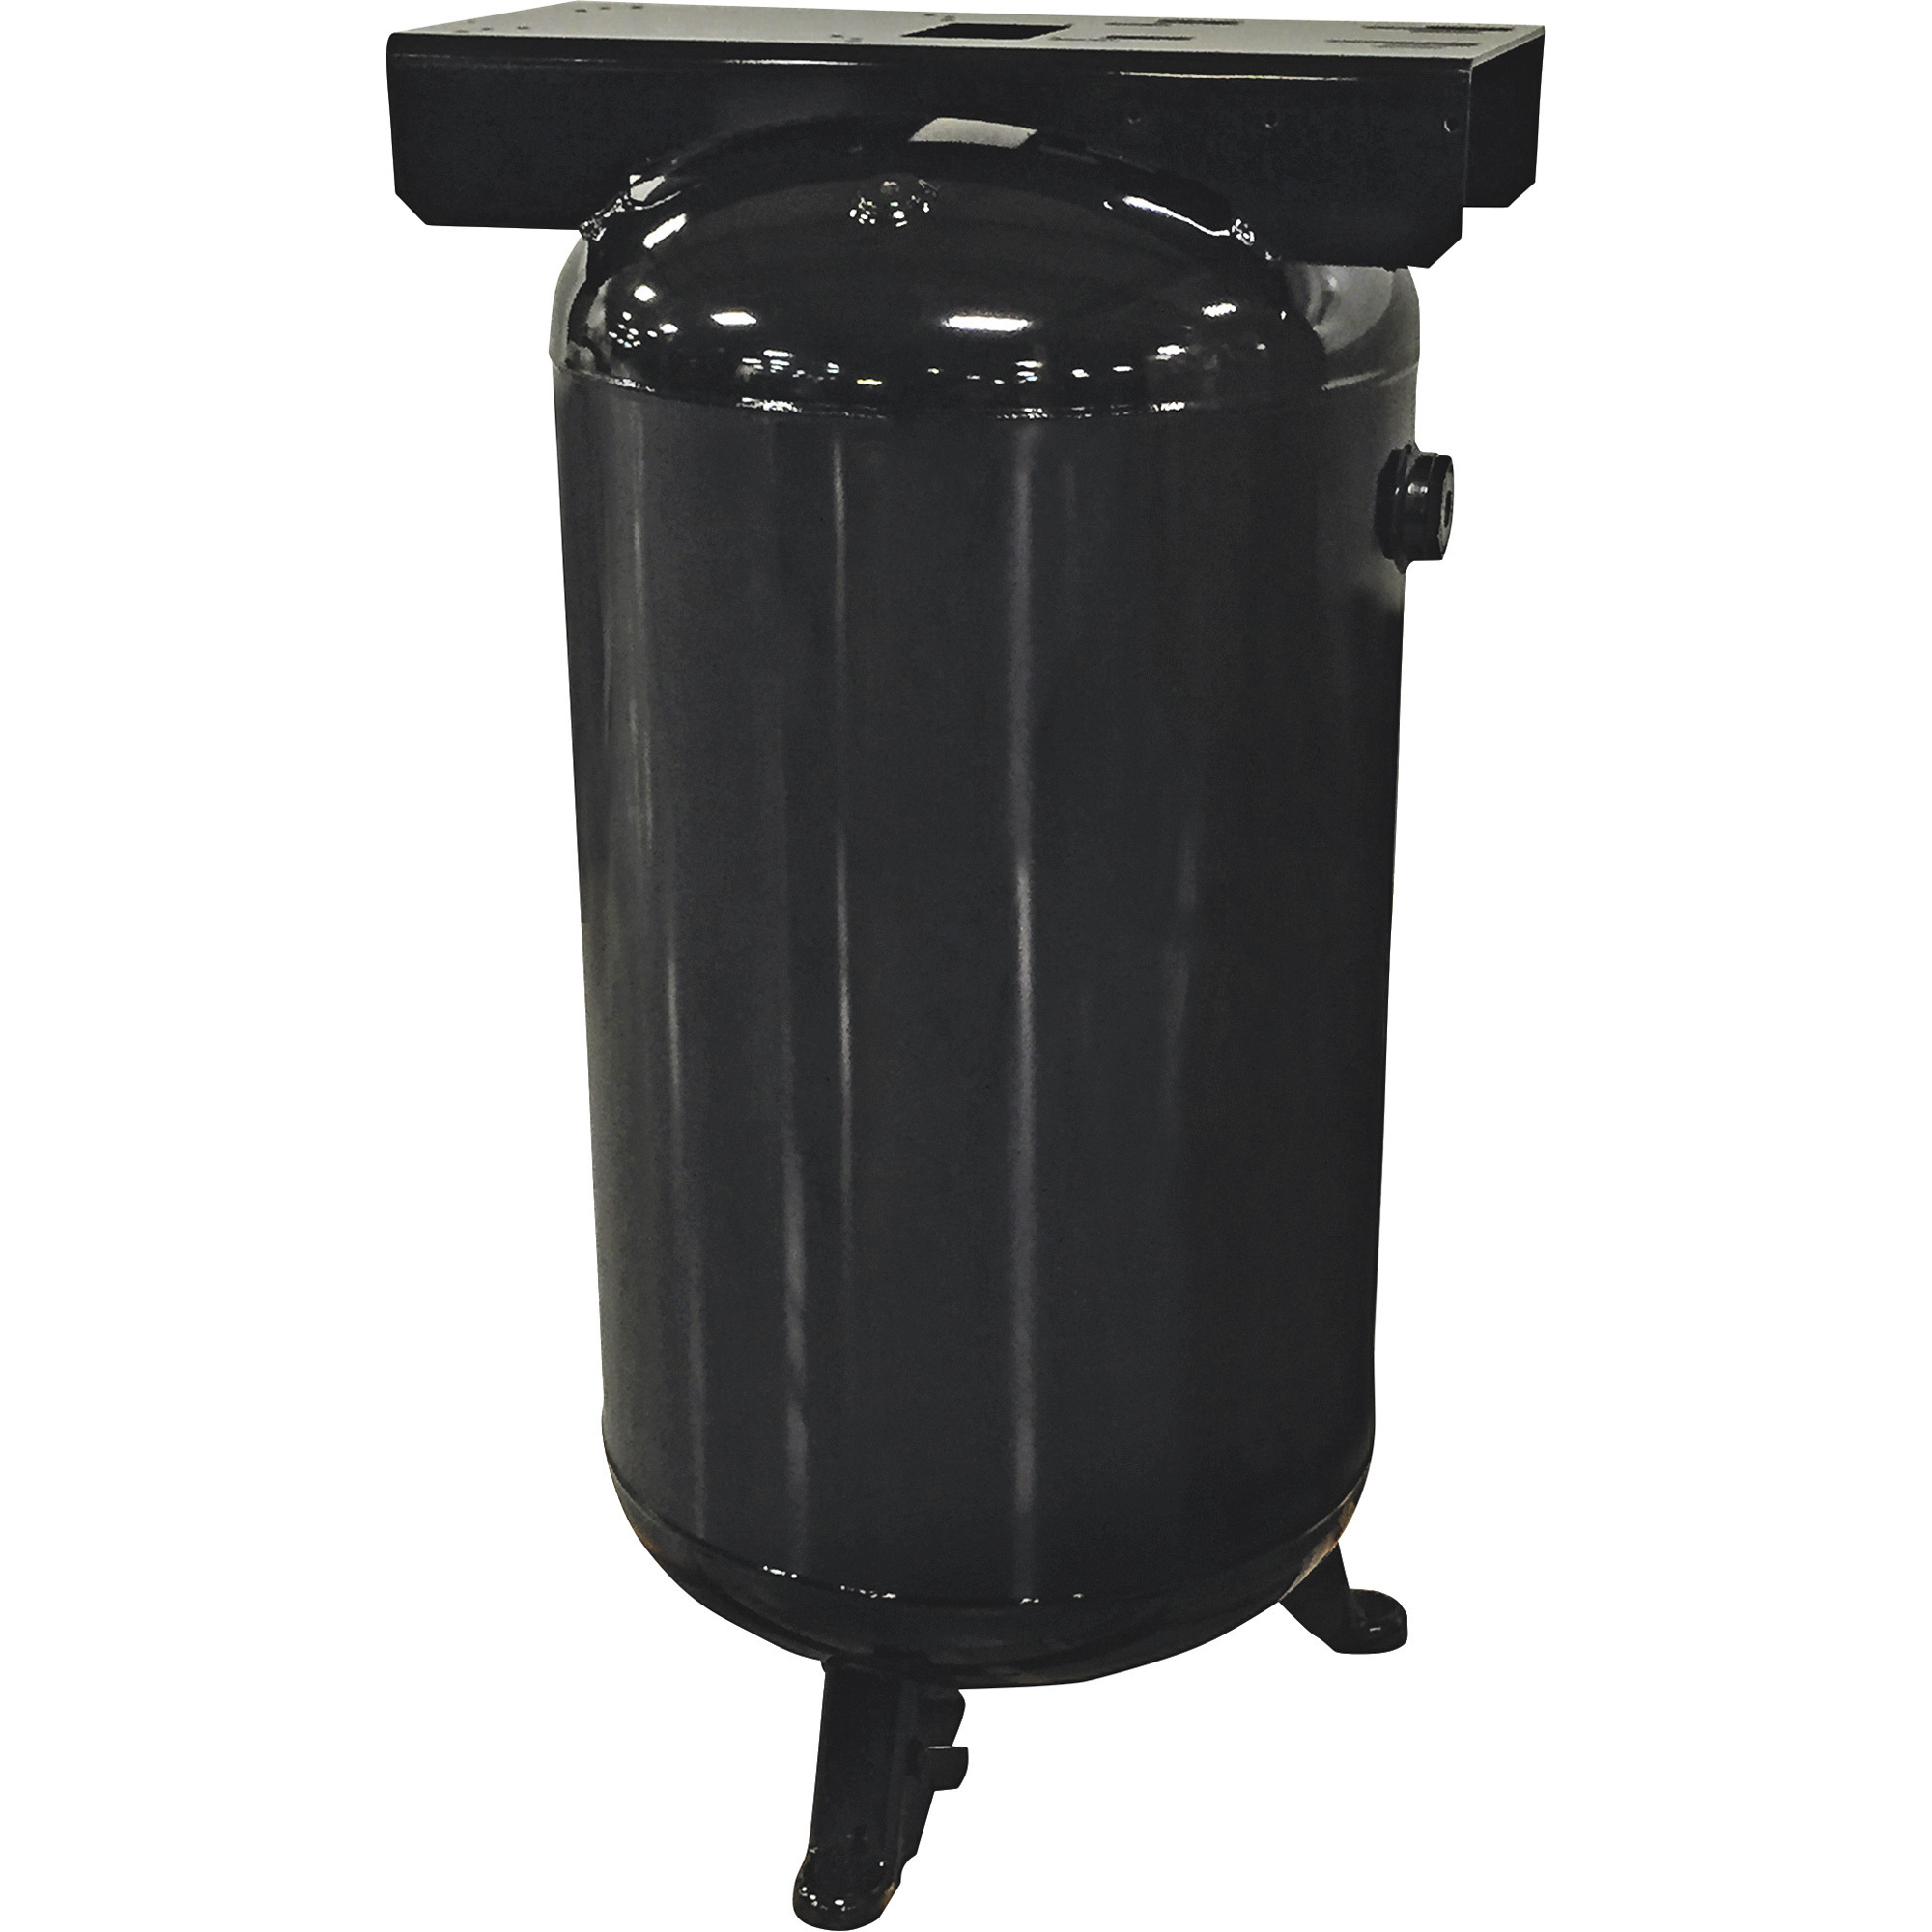 Industrial Air Vertical Receiver Tank with Platform, 80 Gallon, 200 PSI, Model 021-0422